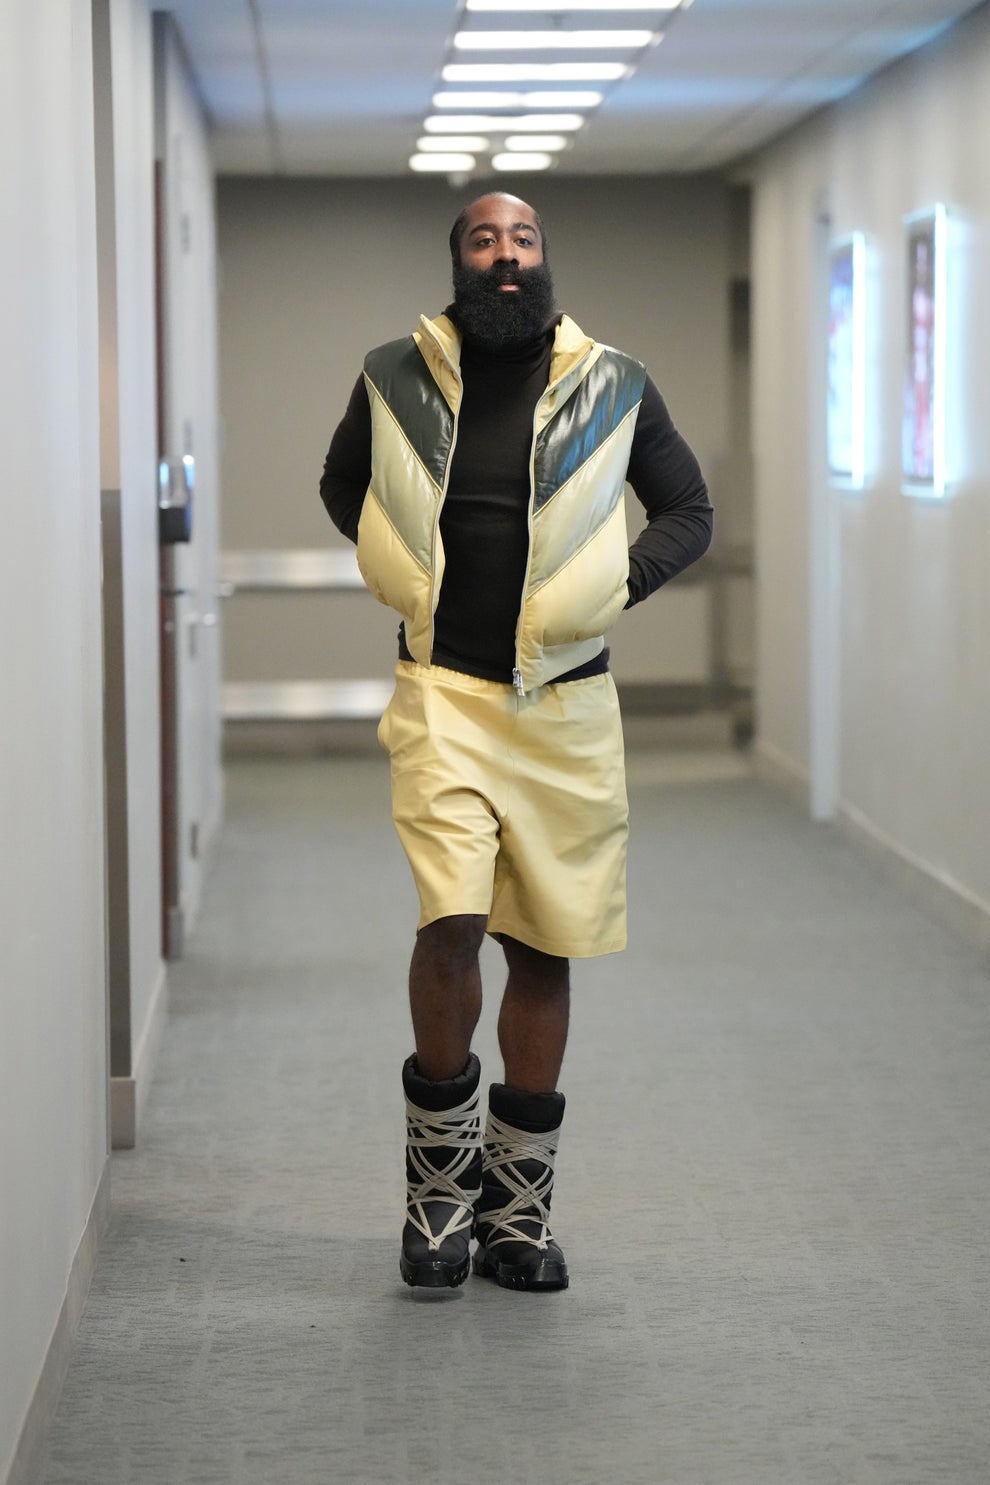 James Harden's Tunnel Outfits and His Stellar Play | Complex